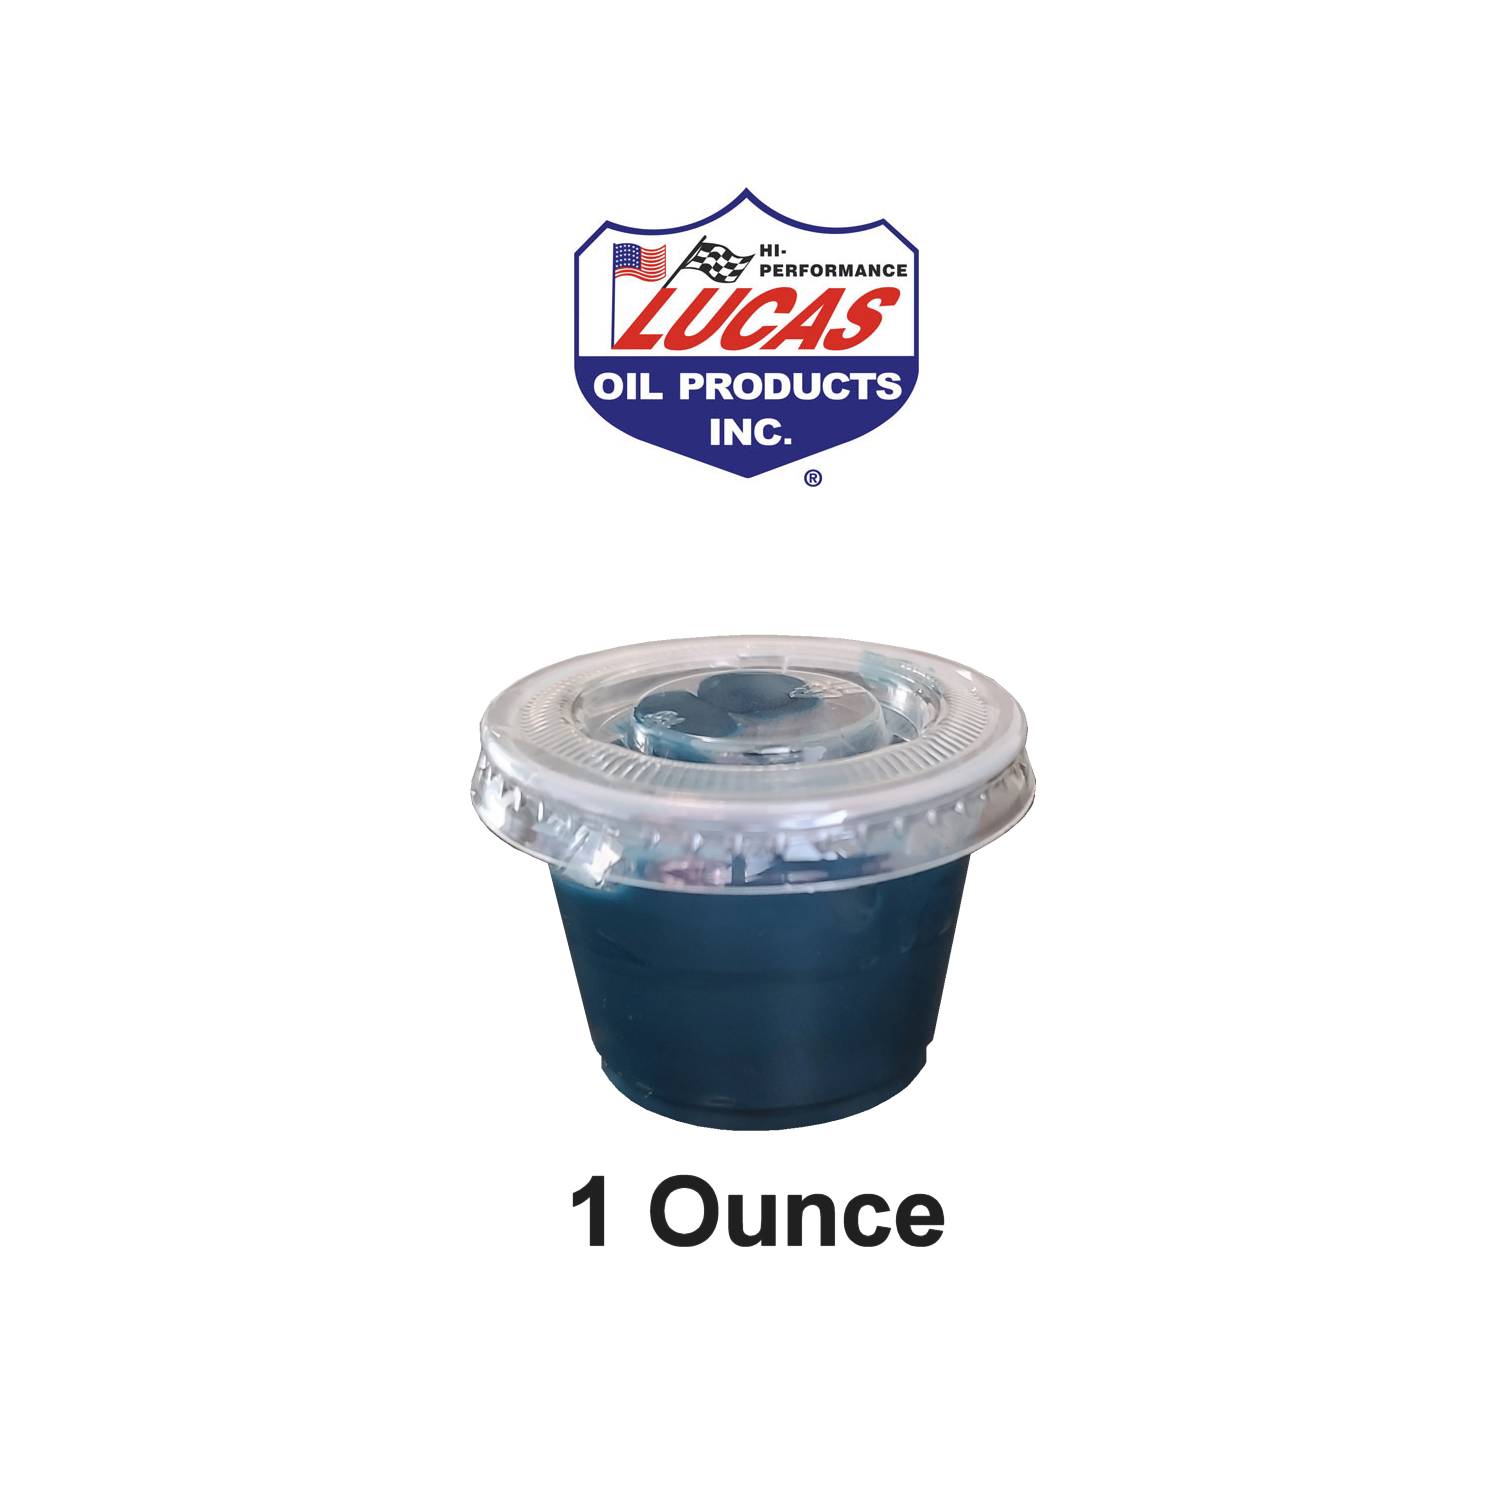 Lucas Oil Marine Grease - TackleDirect